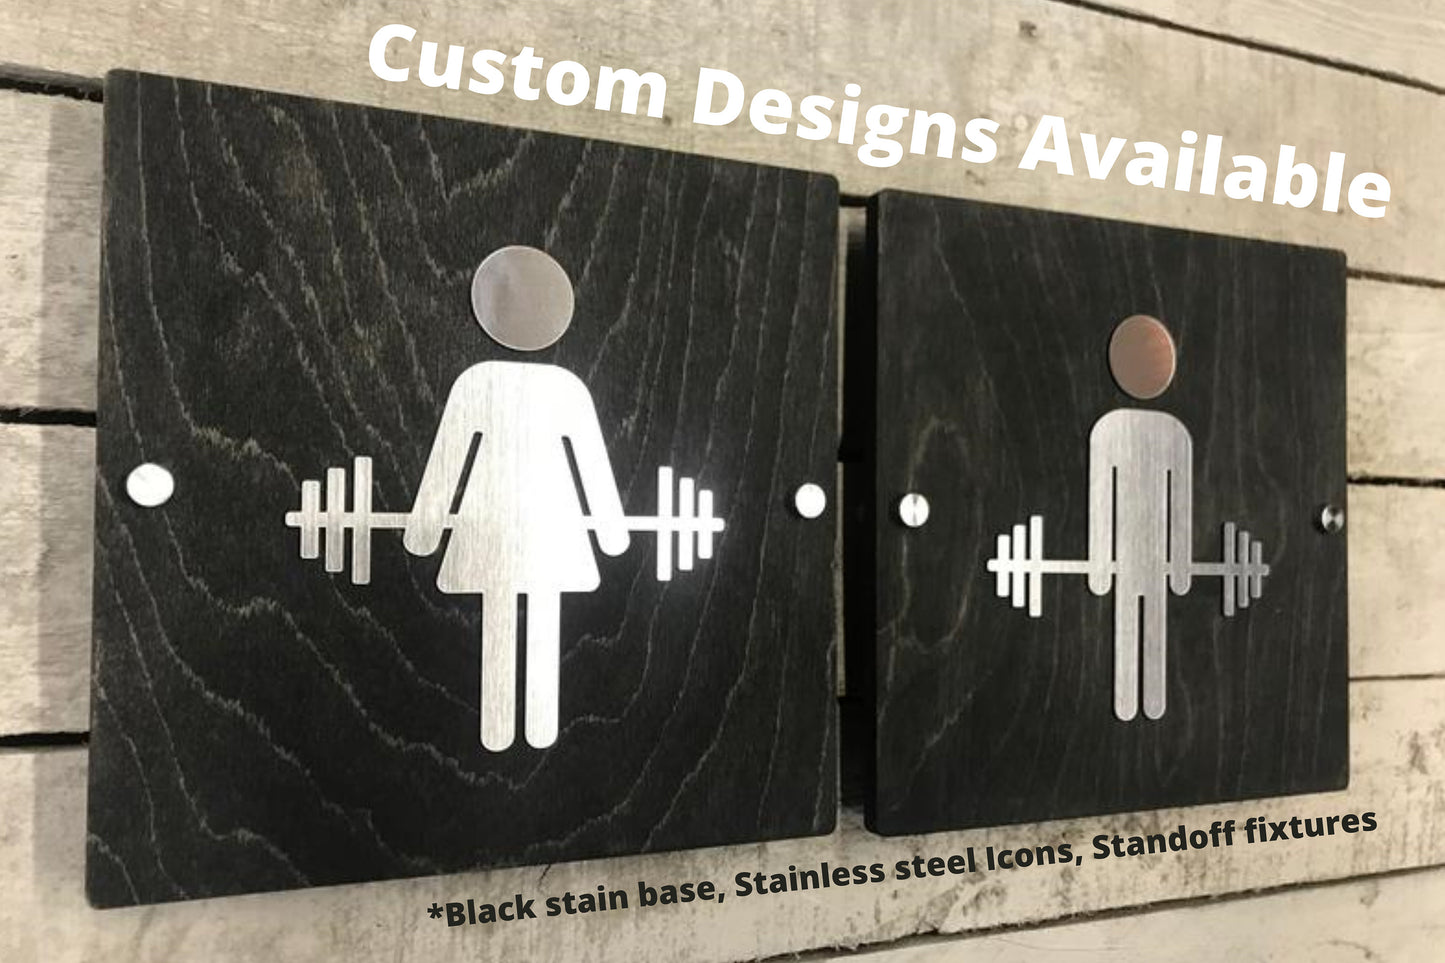 Women Men Unisex Office Cafe Restroom Signs Acrylic Coffee Shop Business Handicap Bathroom Rustic Wood 9 x 9 "| Priced per sign not as a set